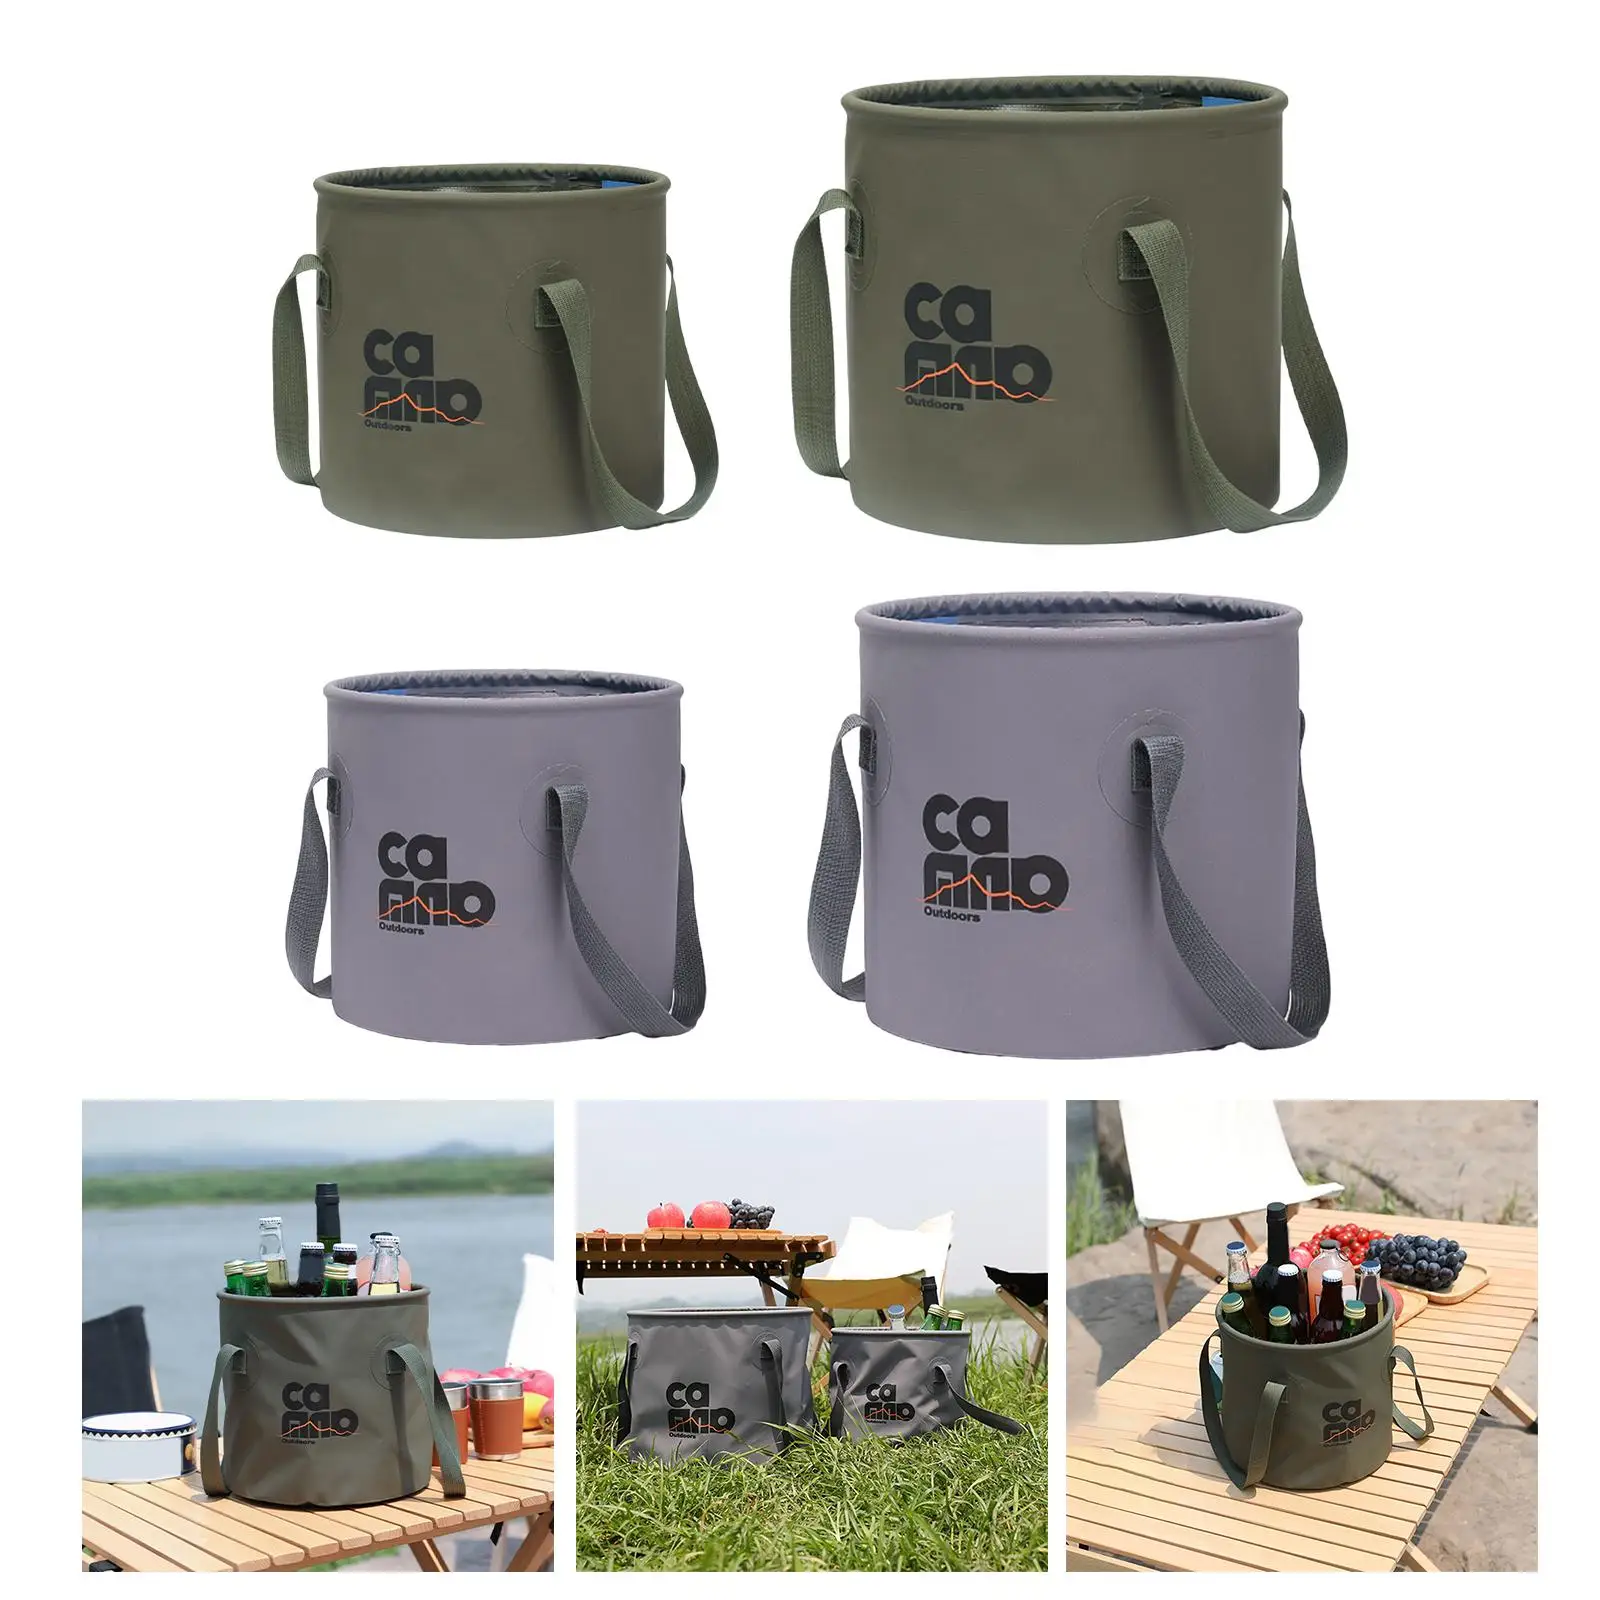 Collapsible Bucket Folding Large Capacity for Travelling Outdoor Camping